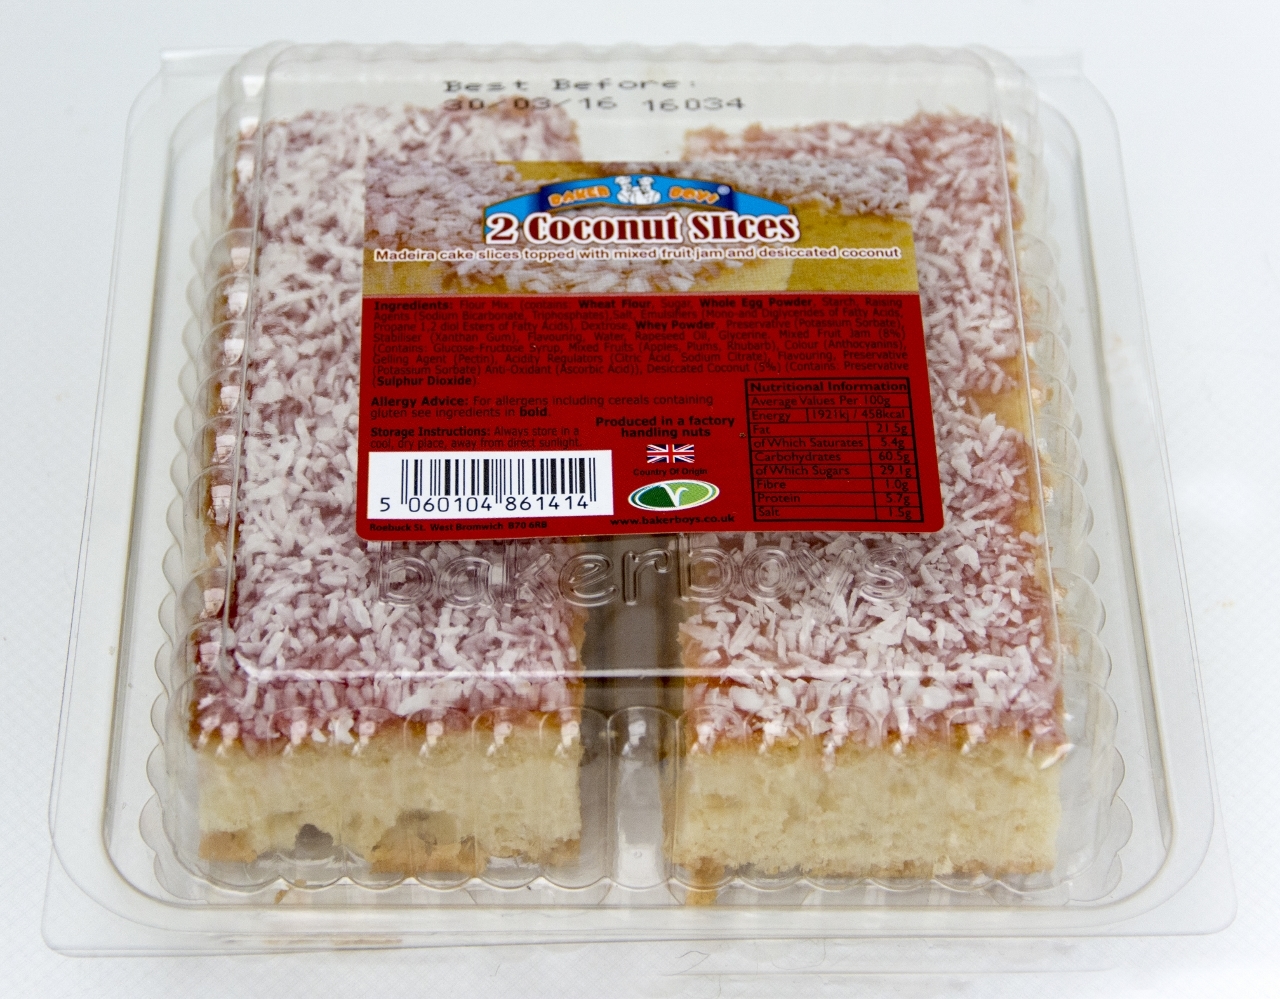 Baker Boys 2 Jam & Coconut Slices (Dec 22 - Jan 24) RRP 1.49 CLEARANCE XL 89p or 2 for 1.50